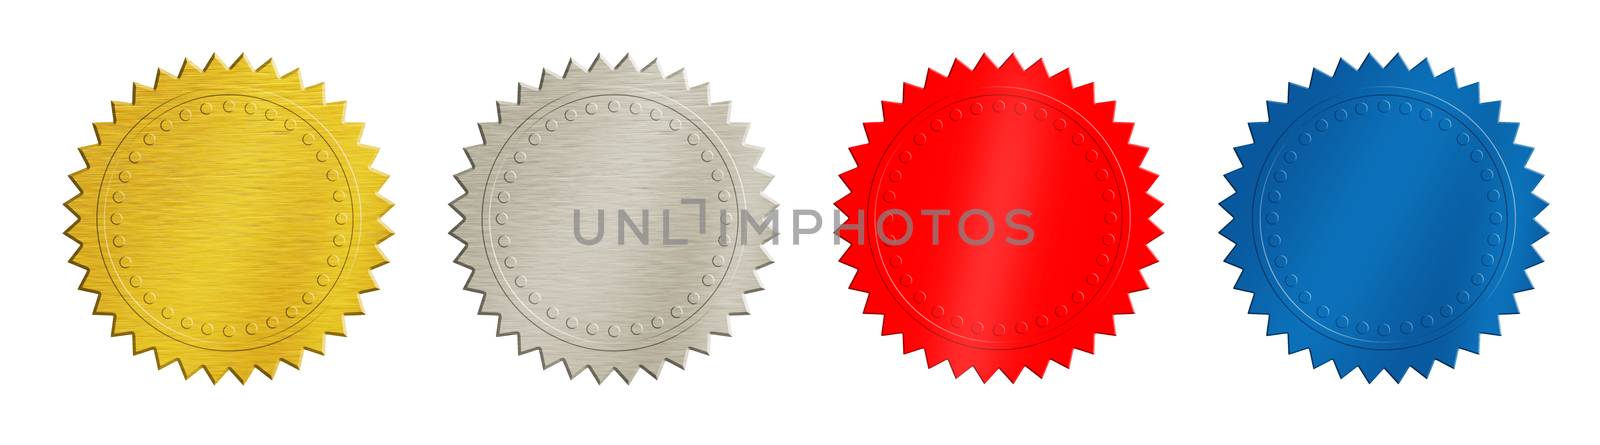 Set of four seal stamps, achievement and award badges (brushed metal gold, silver, blue and red) isolated on white background